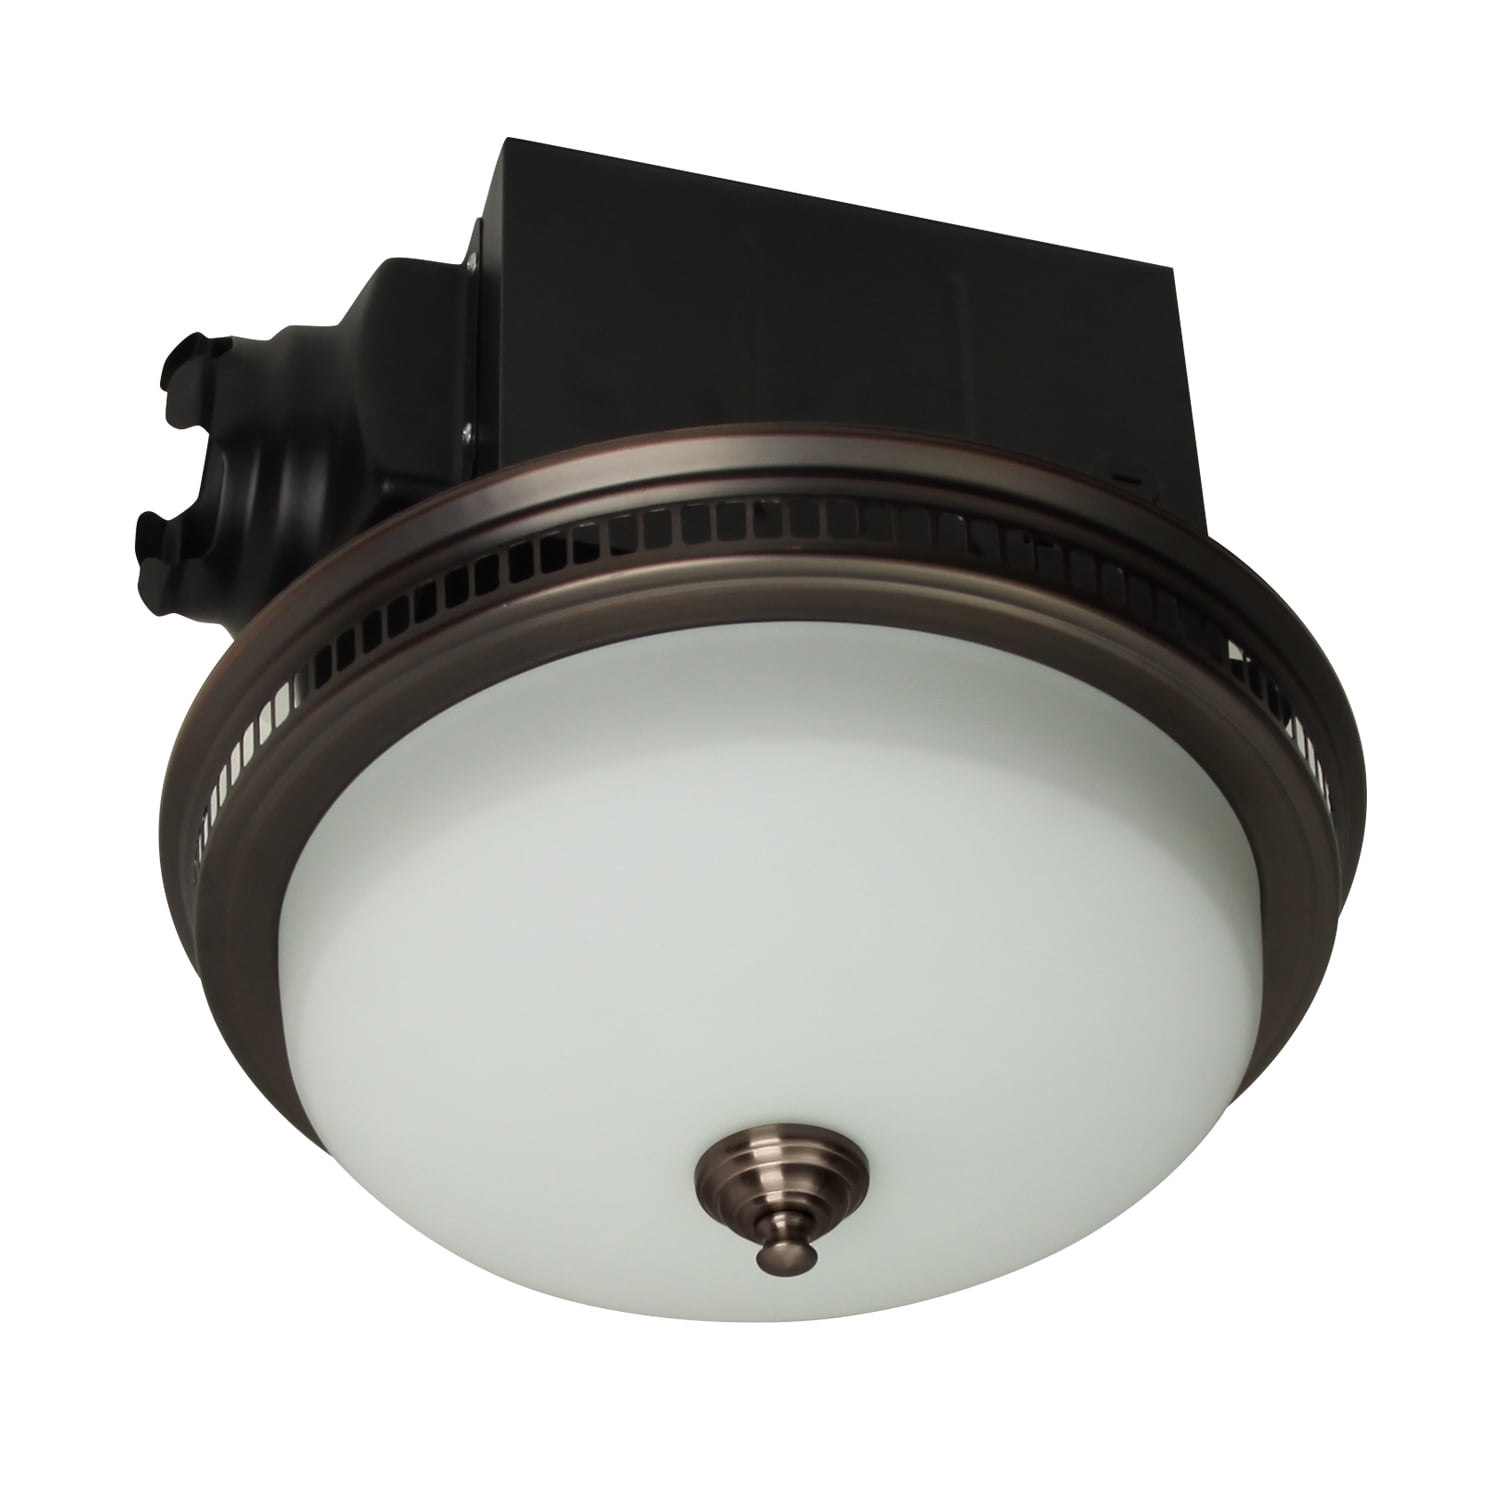 Bathroom Ceiling Exhaust Fan With Light Toilet Air Vent Fan Round Ventilation 